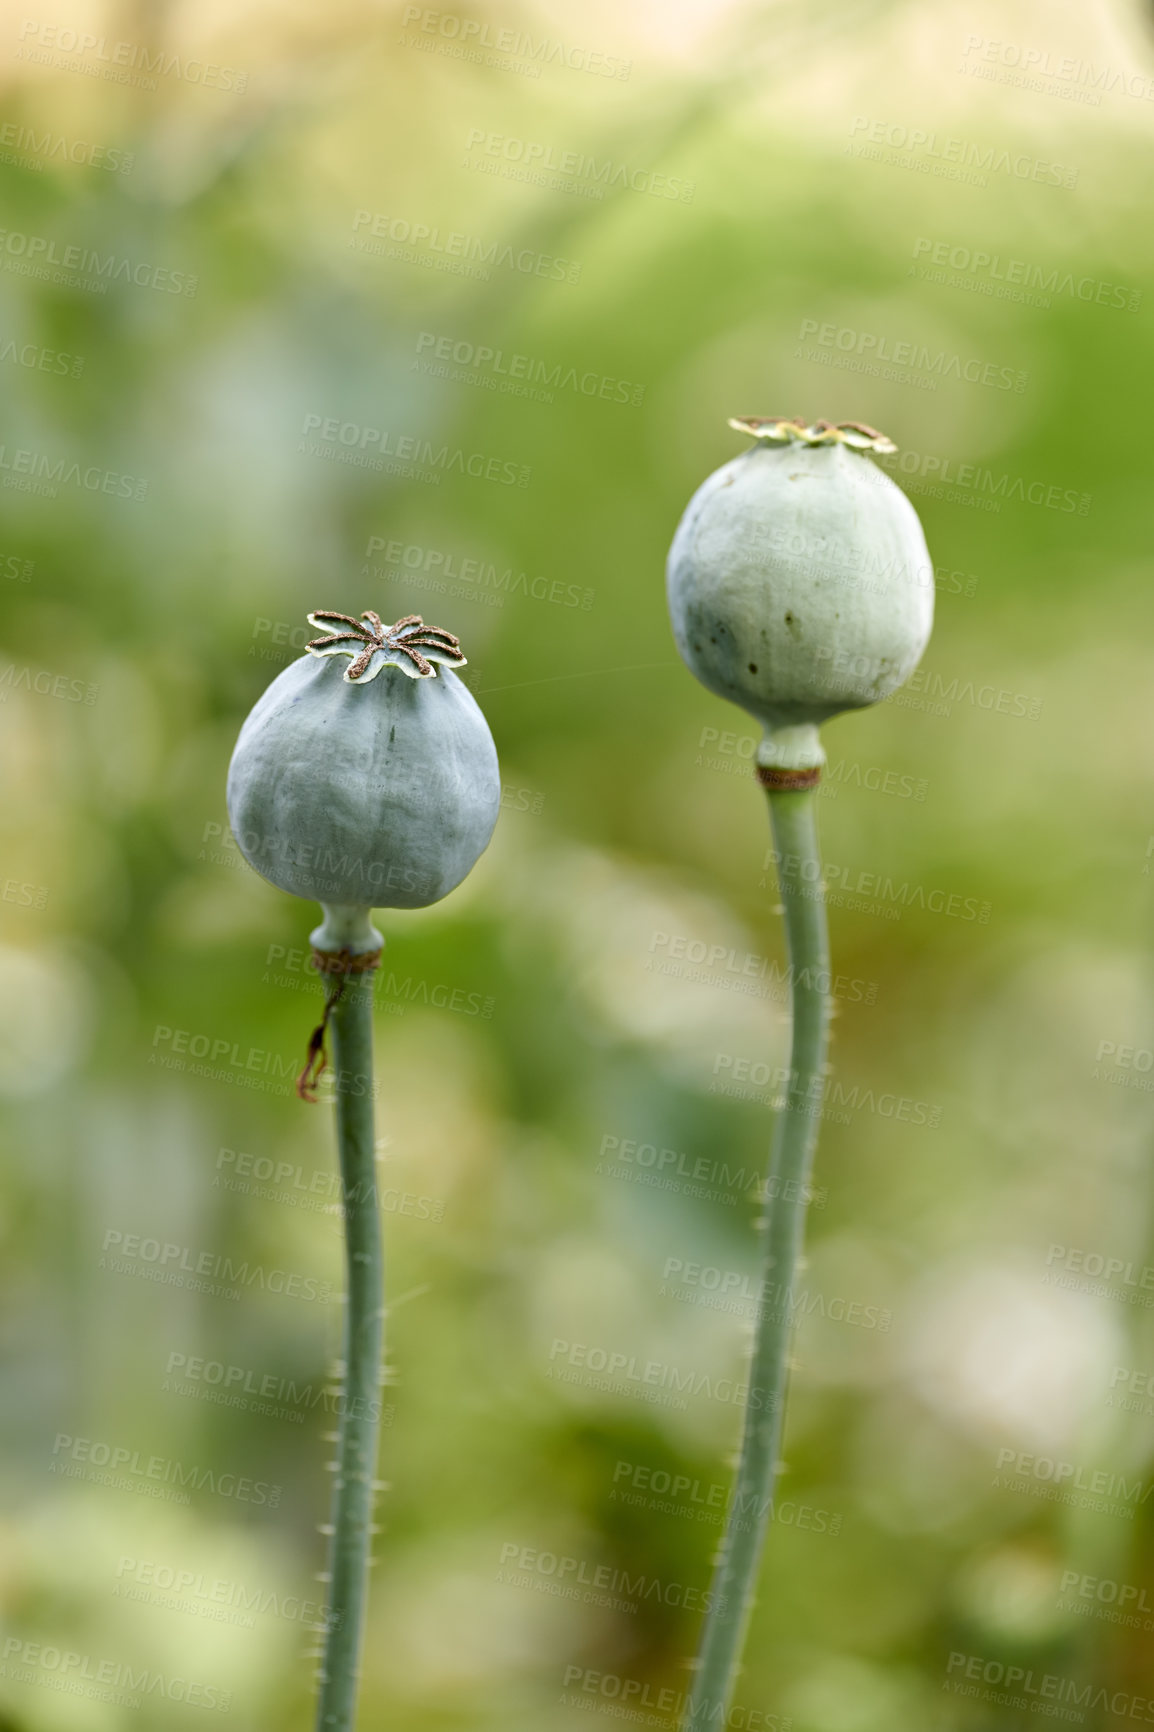 Buy stock photo Closeup of opium poppy flowers blossoming against a blurred green background. Delicate blooms growing in a garden or forest in spring. Papaver somniferum L. stems and leaves in meadow with copy space